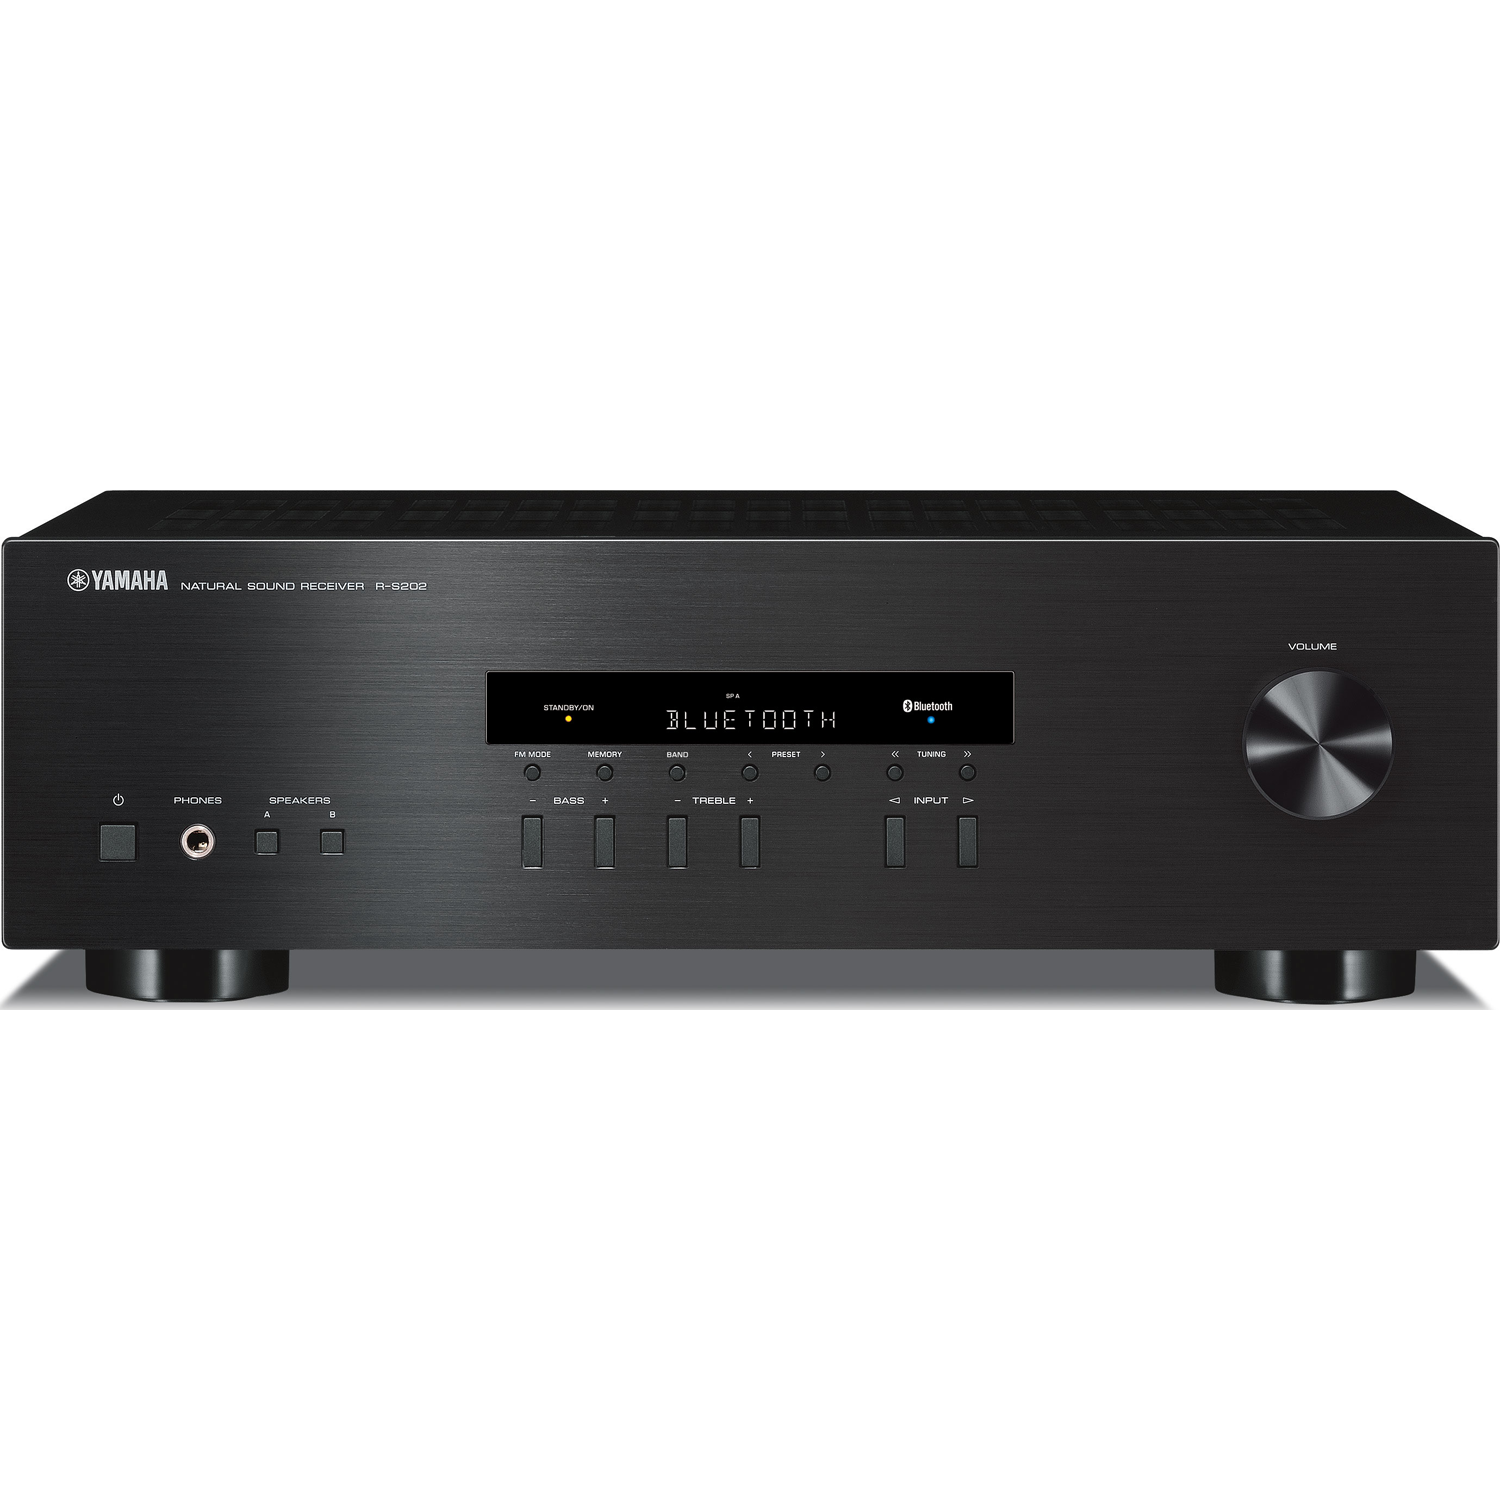 DENON DRA-900H 2.2 Ch. 100W Built-in | Accessories4less 8K with Receiver AV HEOS®